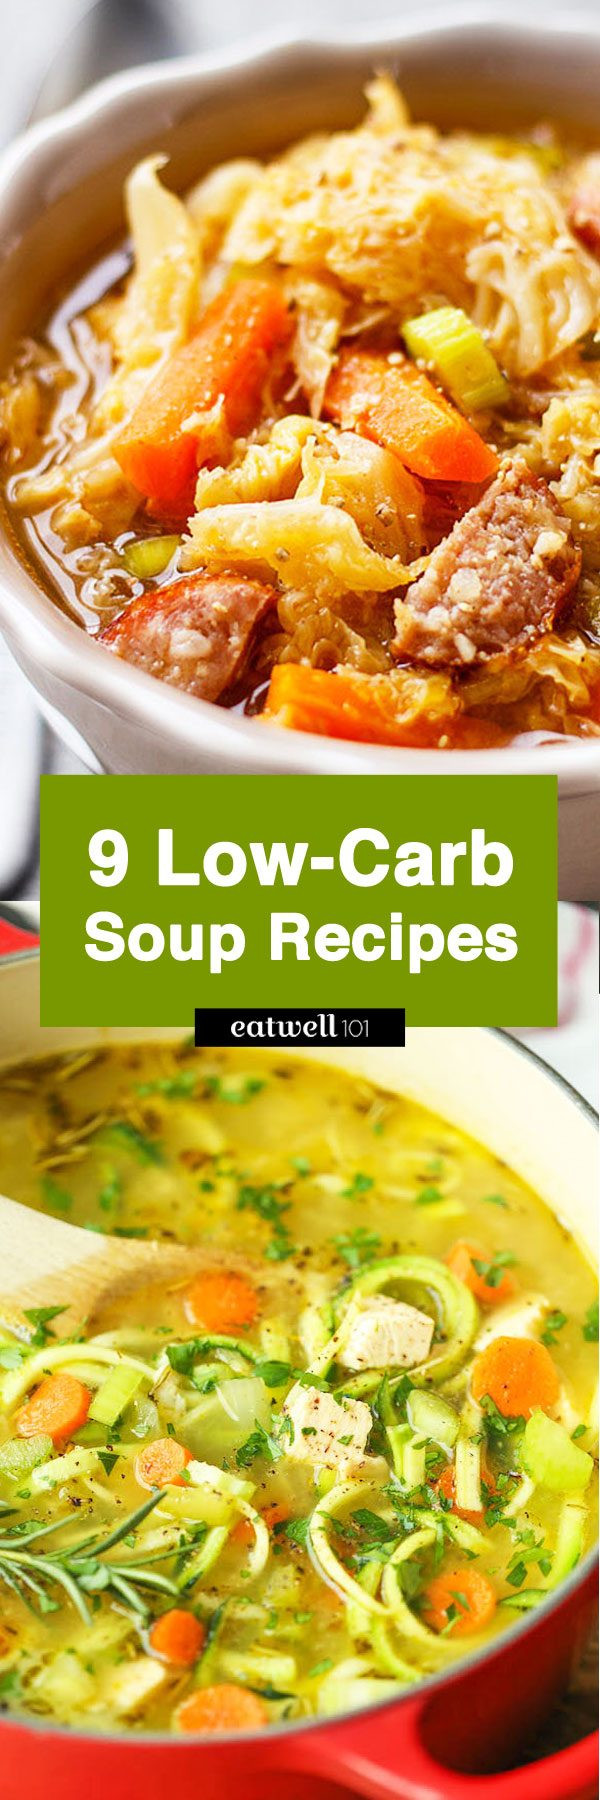 Carbs In Potato Soup
 9 Low Carb Soup Recipes to Stay Warm and Full of Energy